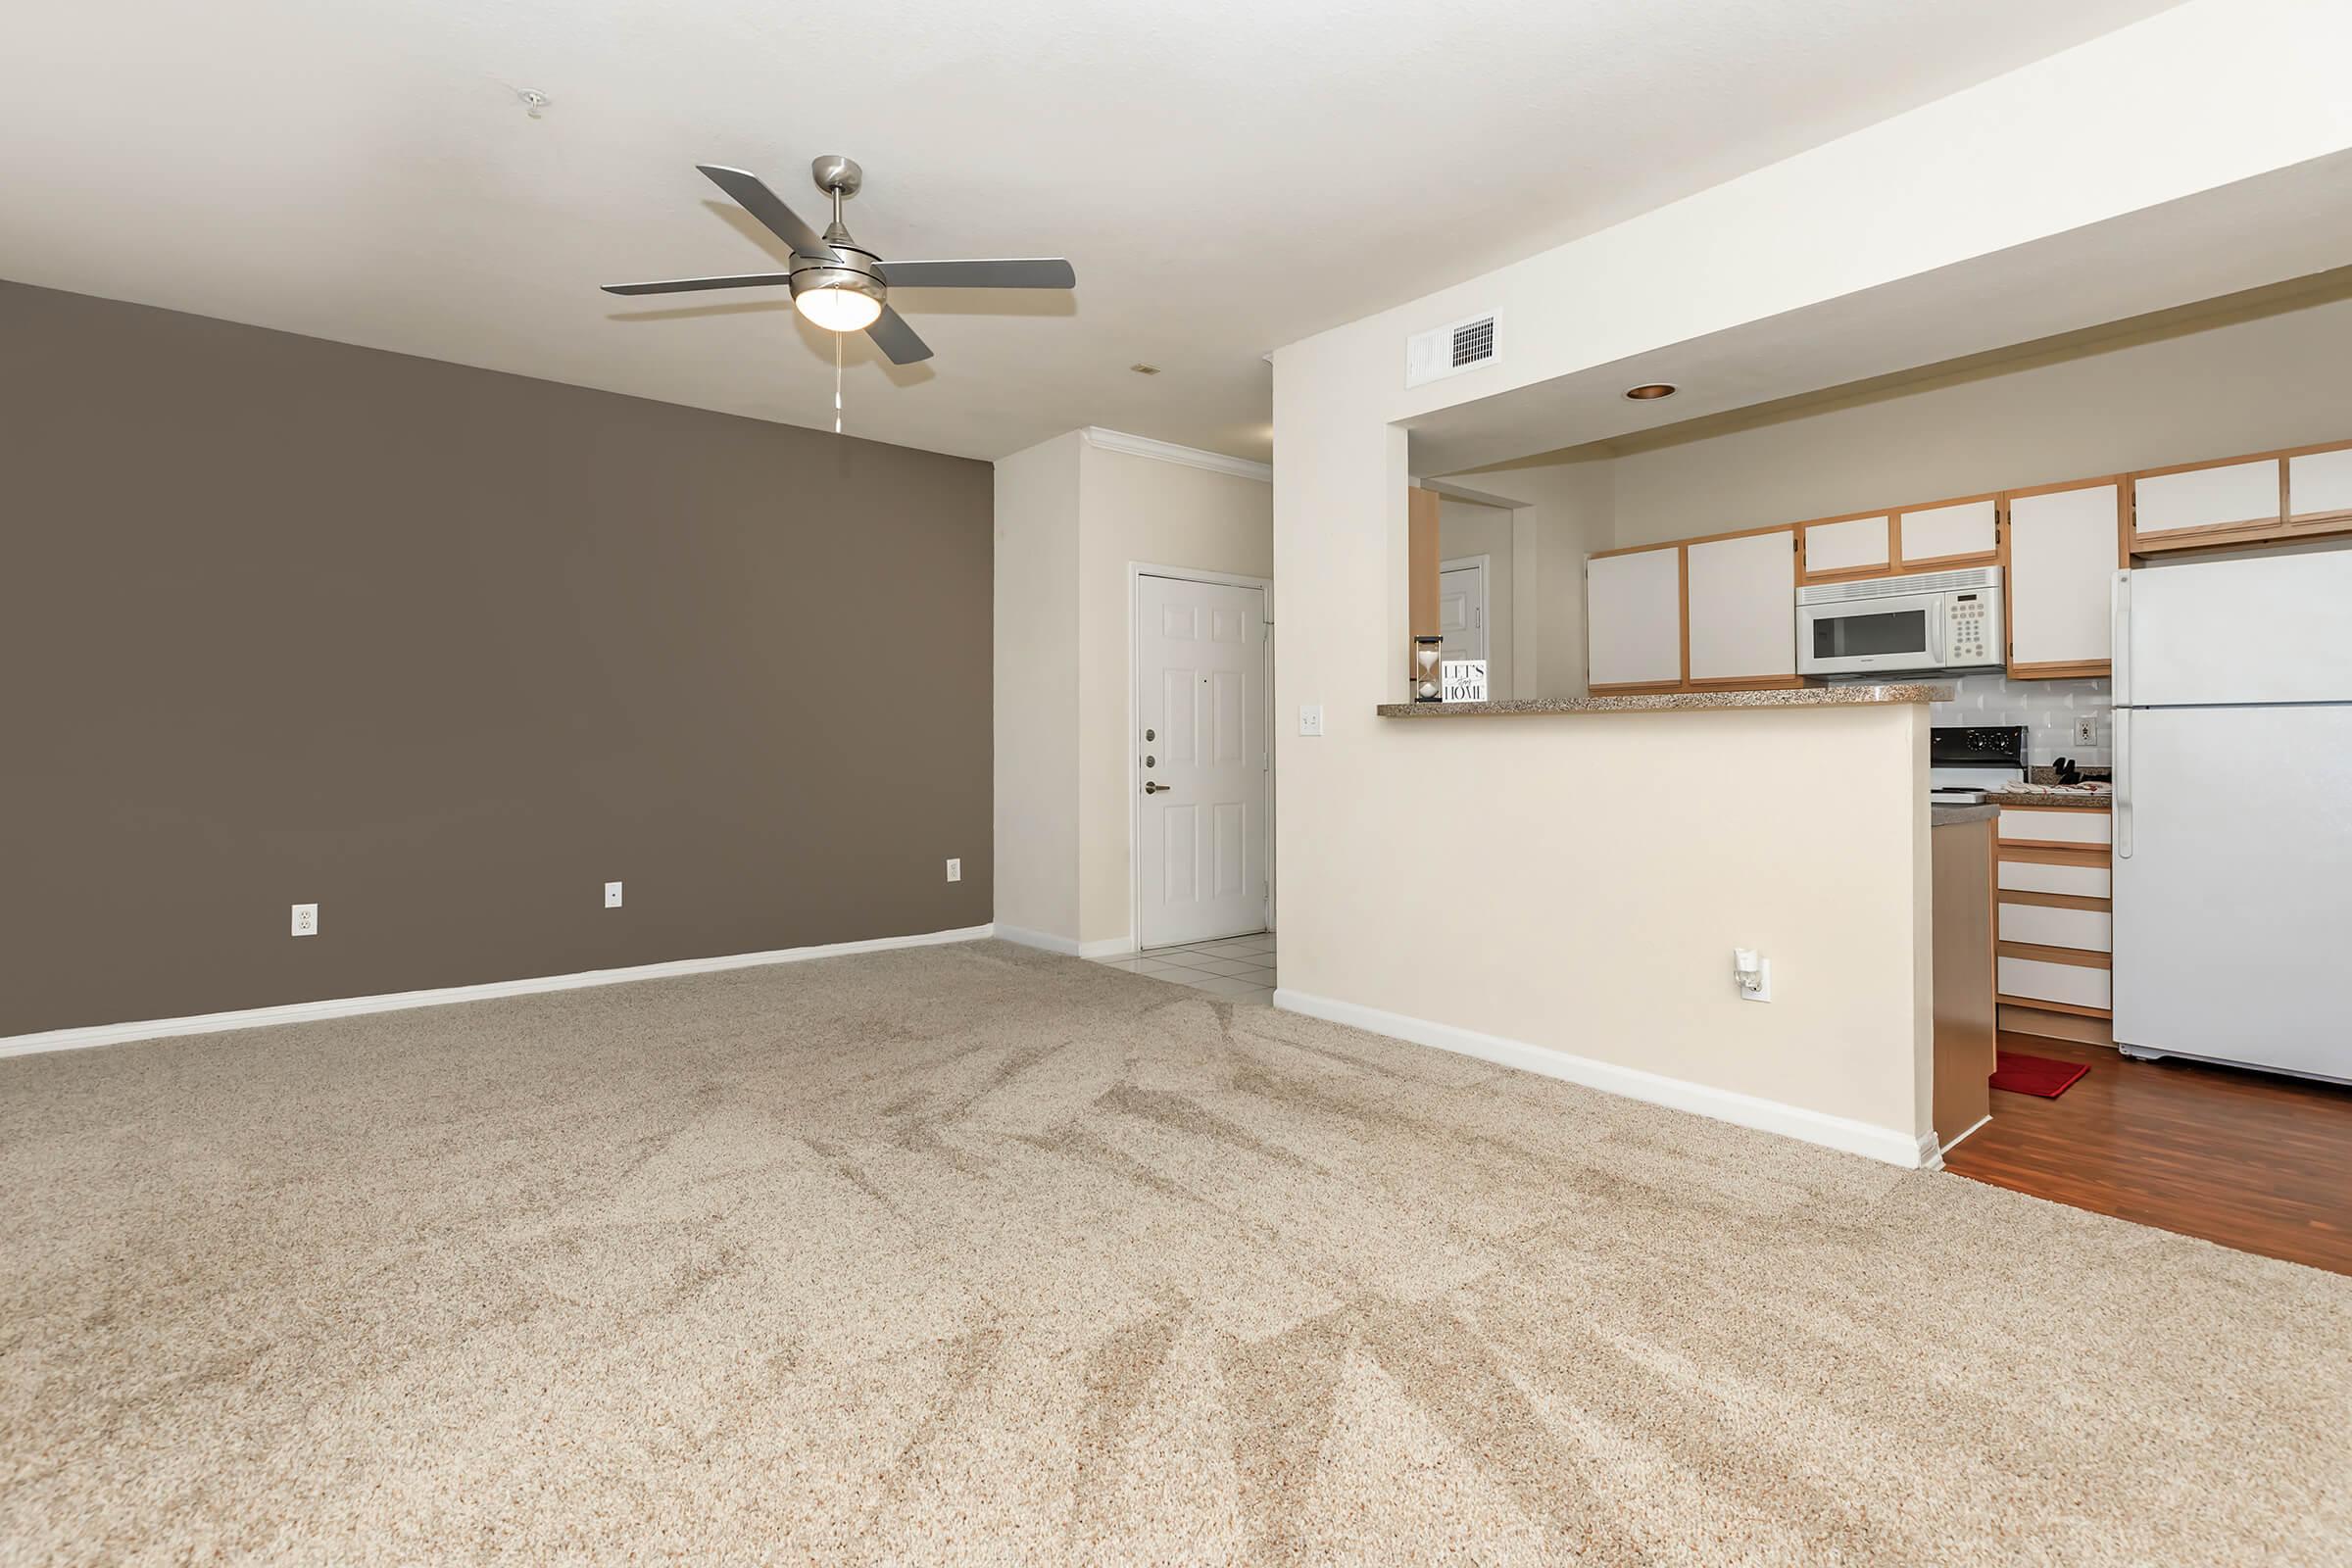 a carpeted living room and kitchen with wooden floor